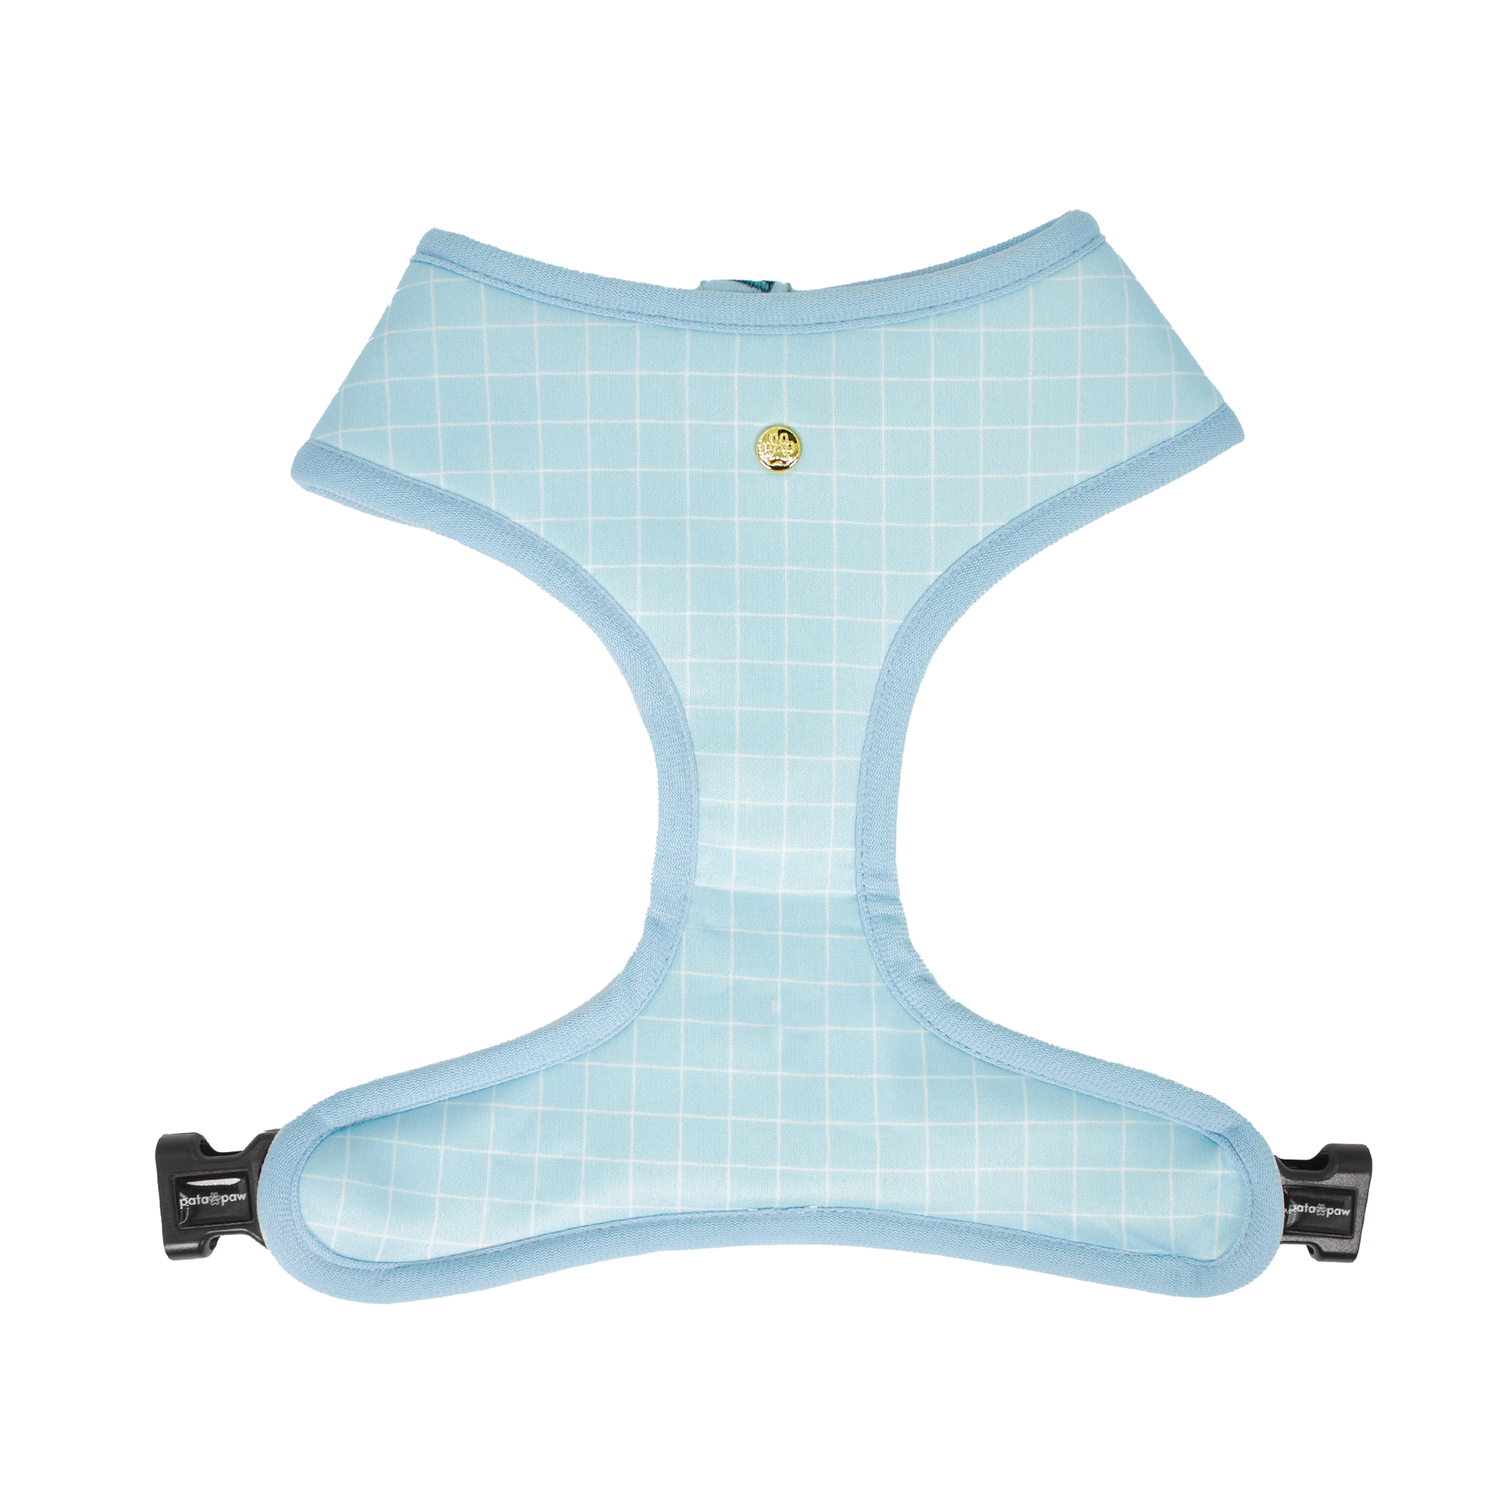 Pata Paw pool pups reversible harness showing a timeless and chic checkered pattern in aqua blue.